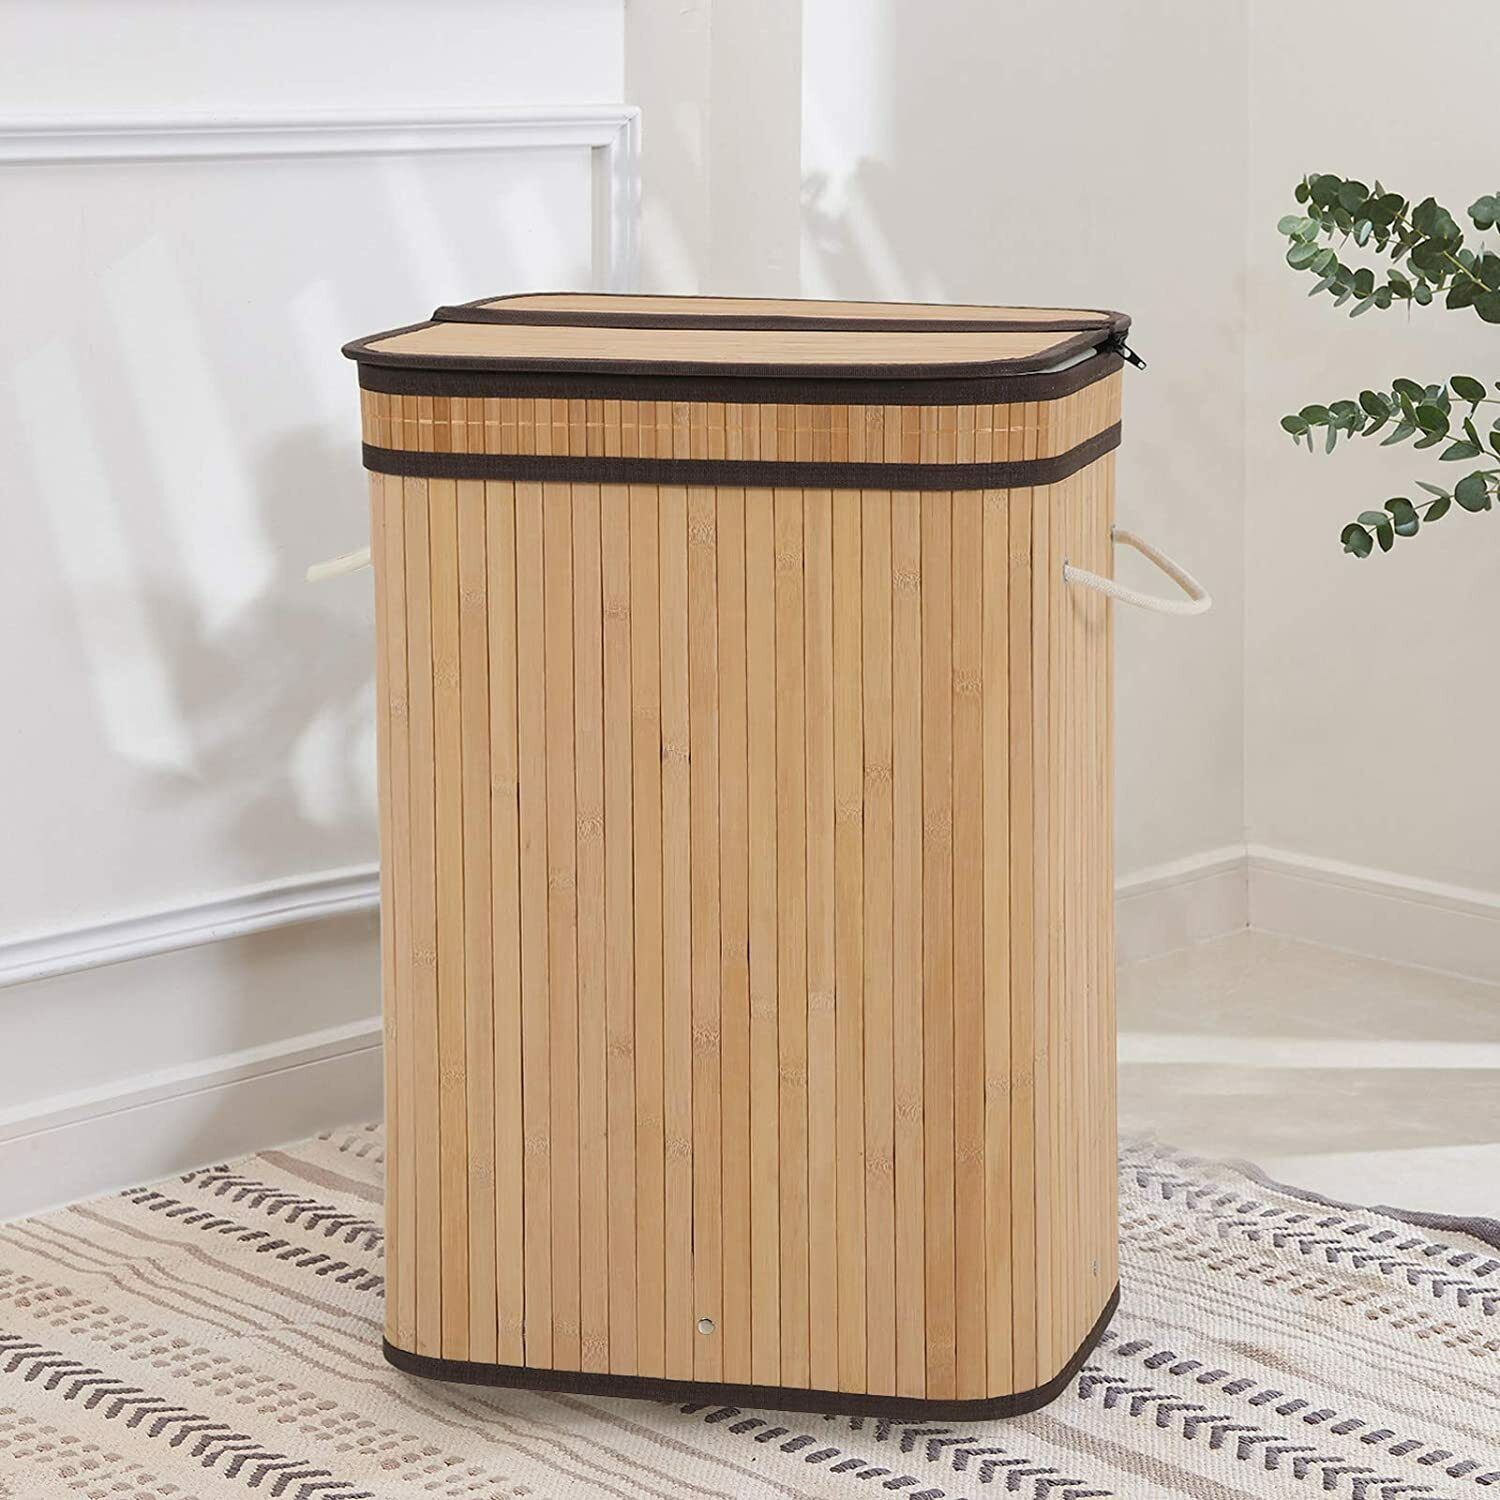 BlushBees® Laundry Hamper with Lid, Large Foldable, made with Natural Bamboo Laundry Basket.